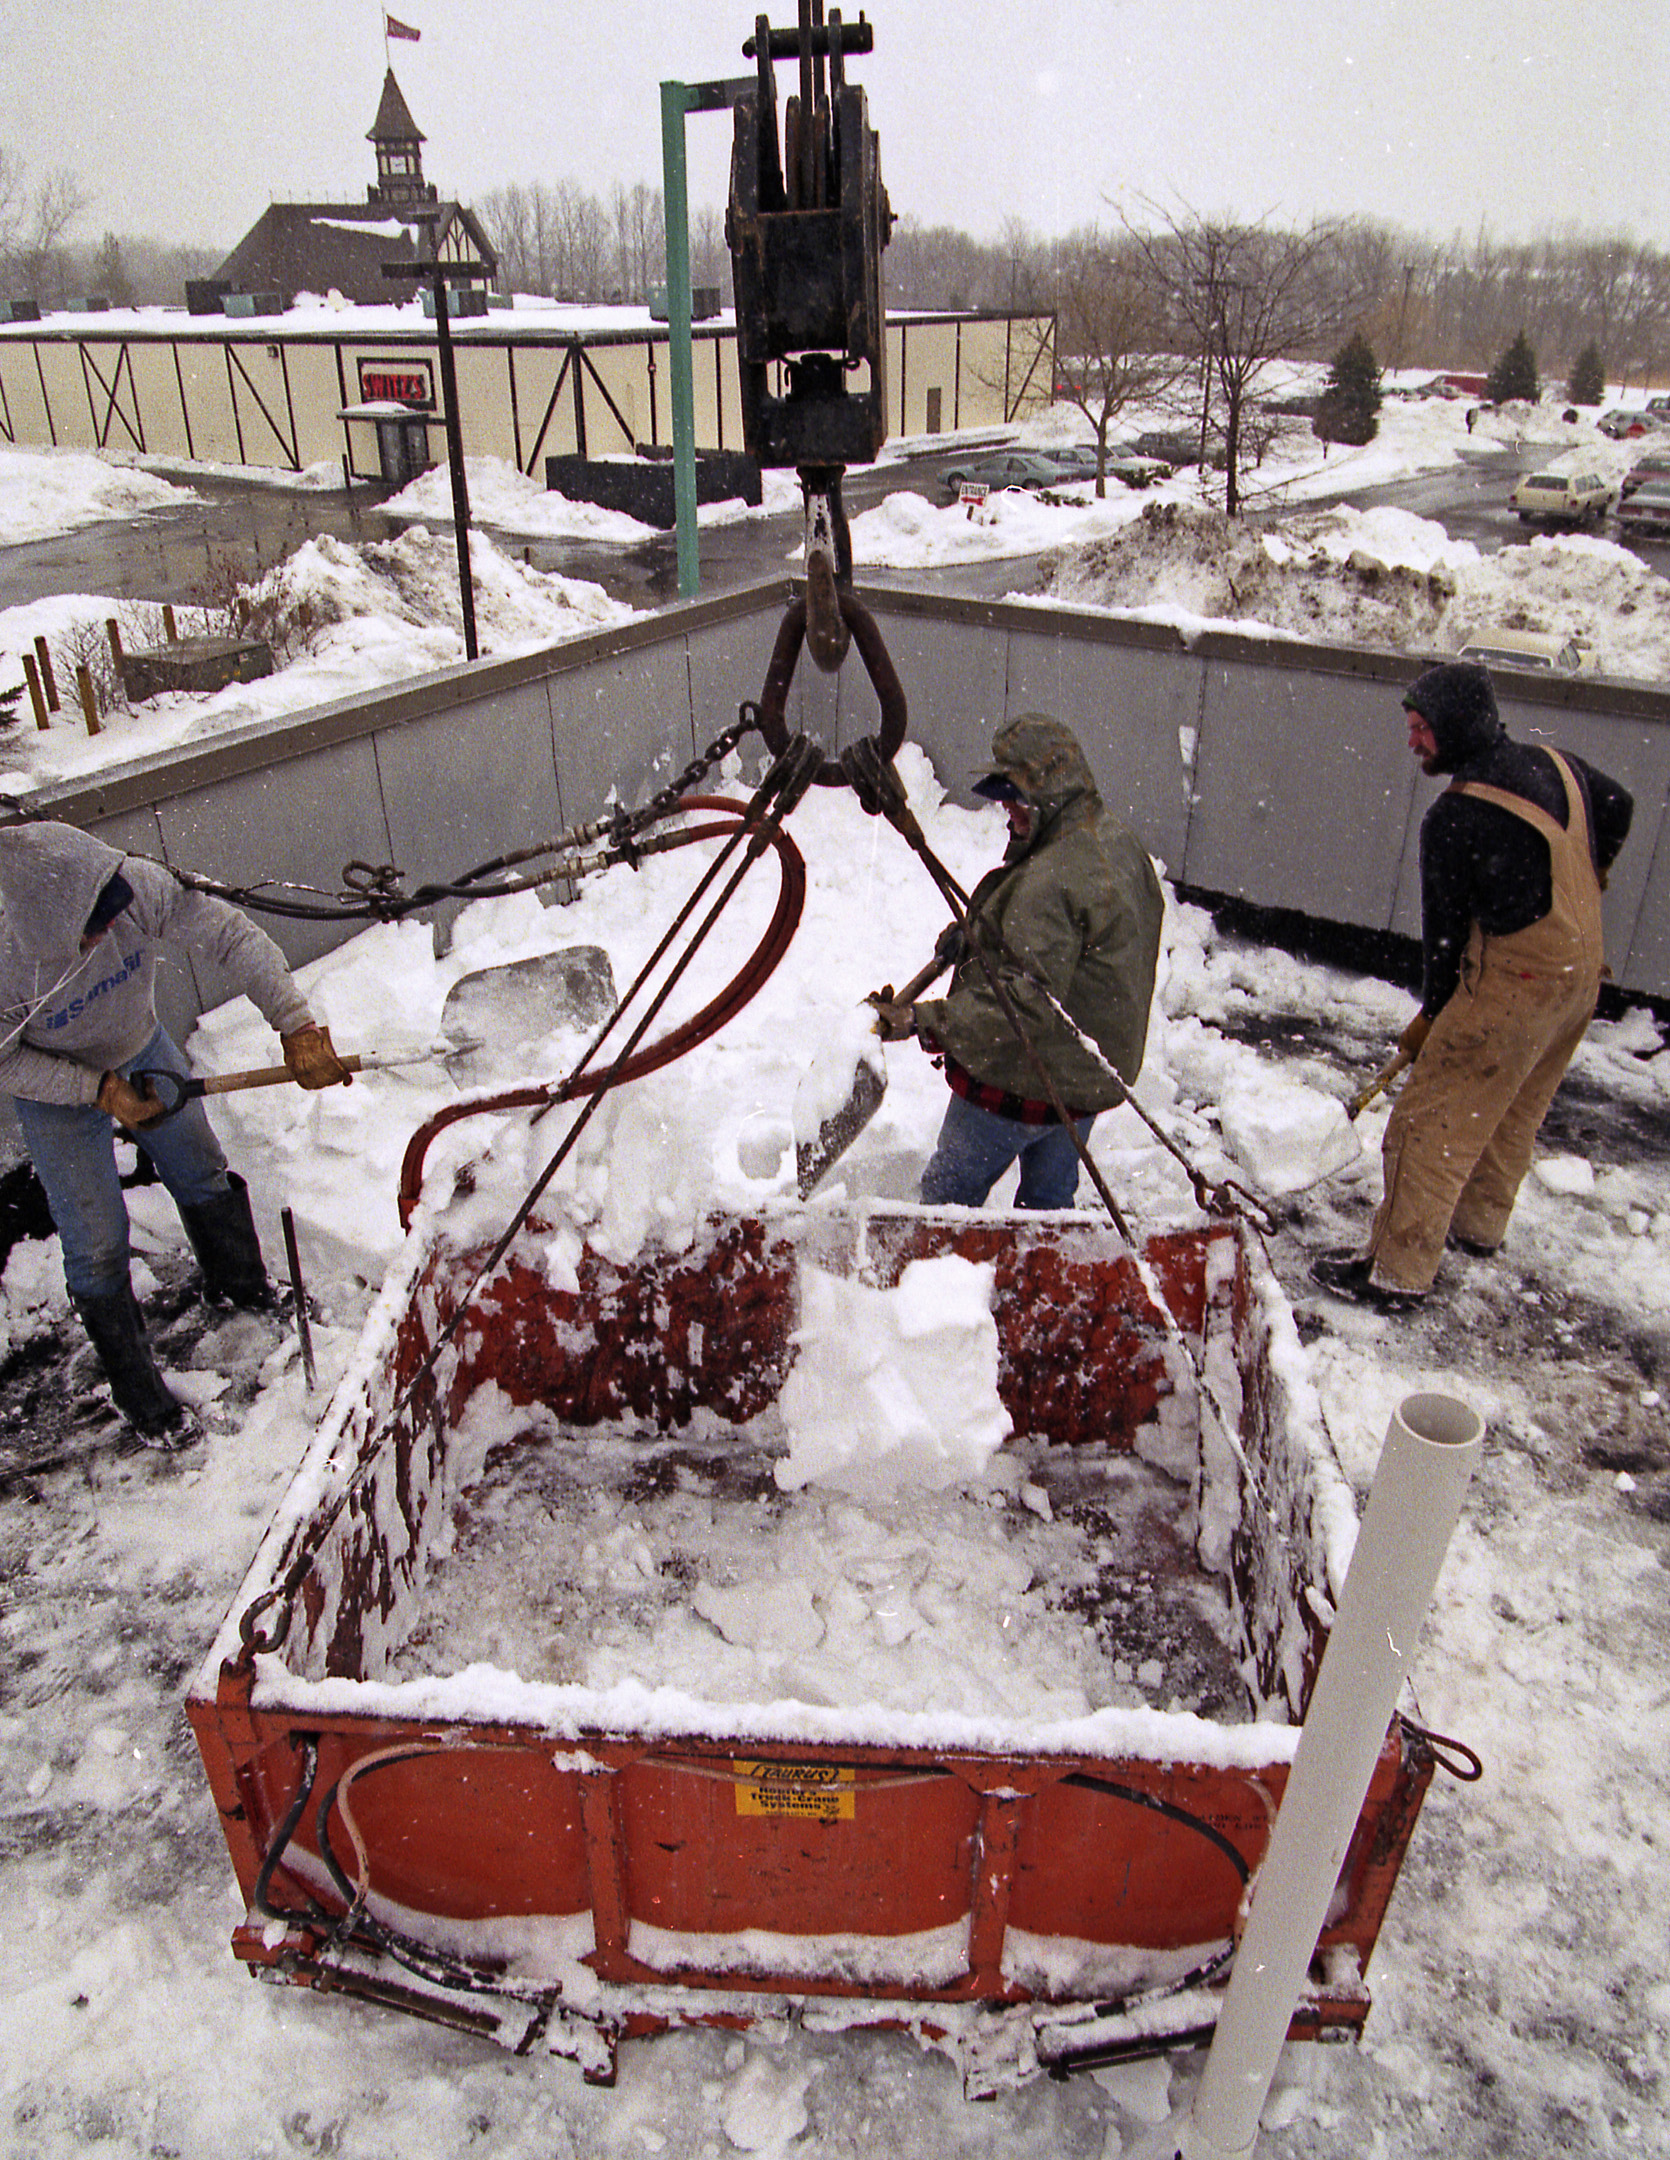 Ron Haney, Dennis Therrien and Dave Bean of Josall Roofing, using a crane to get snow off roof of Denny's Restaurant on South Bay Road, North Syracuse following the Blizzard of '93.